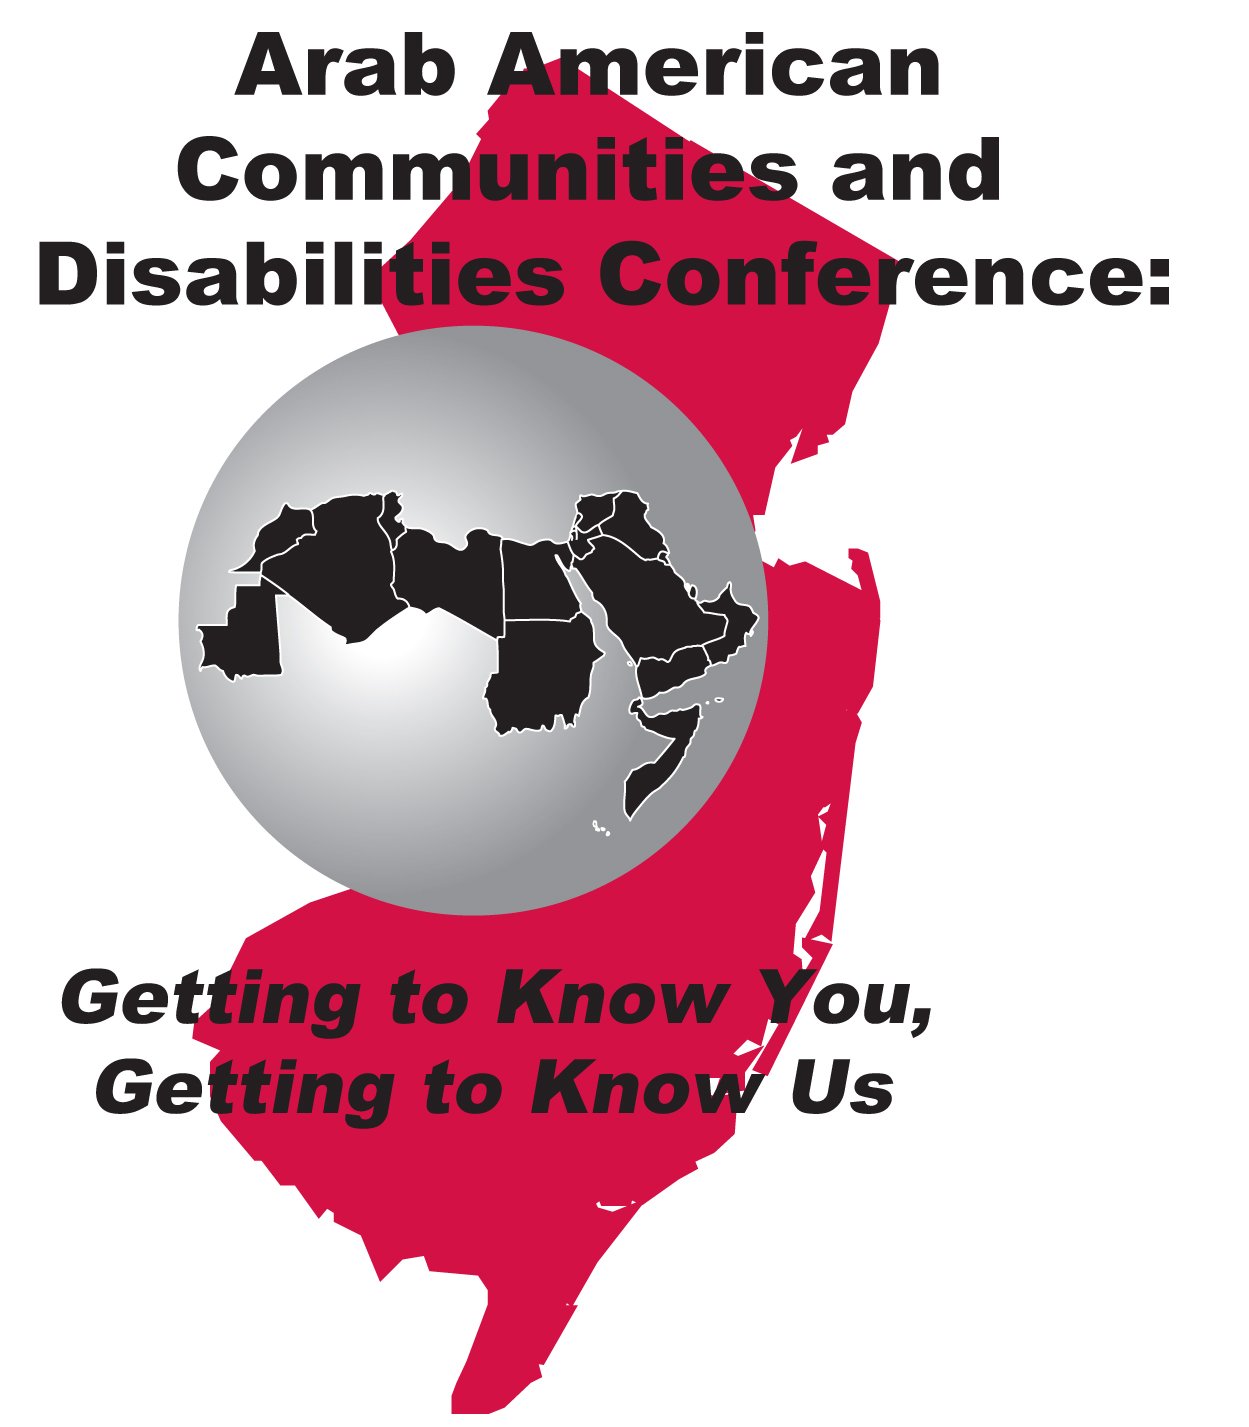 Arab American Communities and Disabilities: Getting to Know You, Getting to Know Us